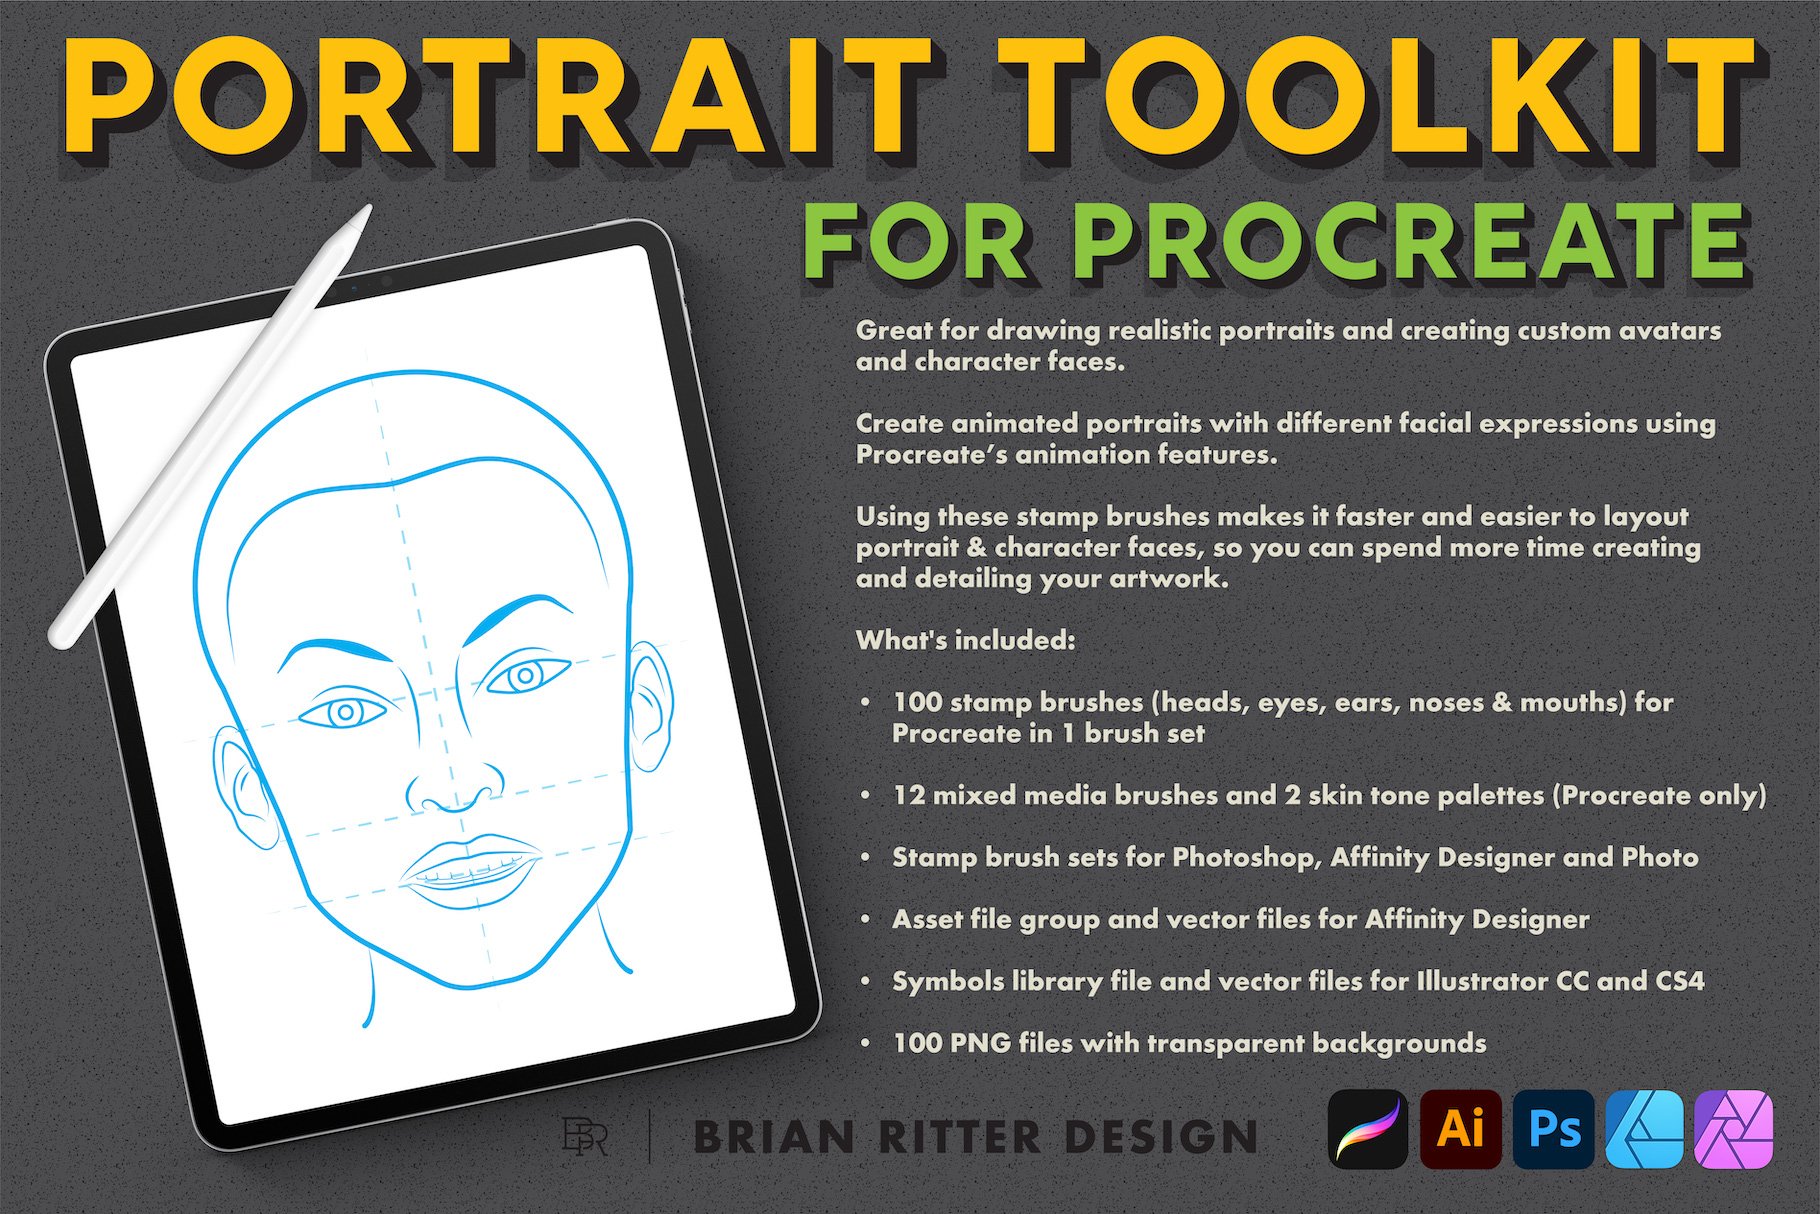 Portrait Toolkit For Procreatepreview image.